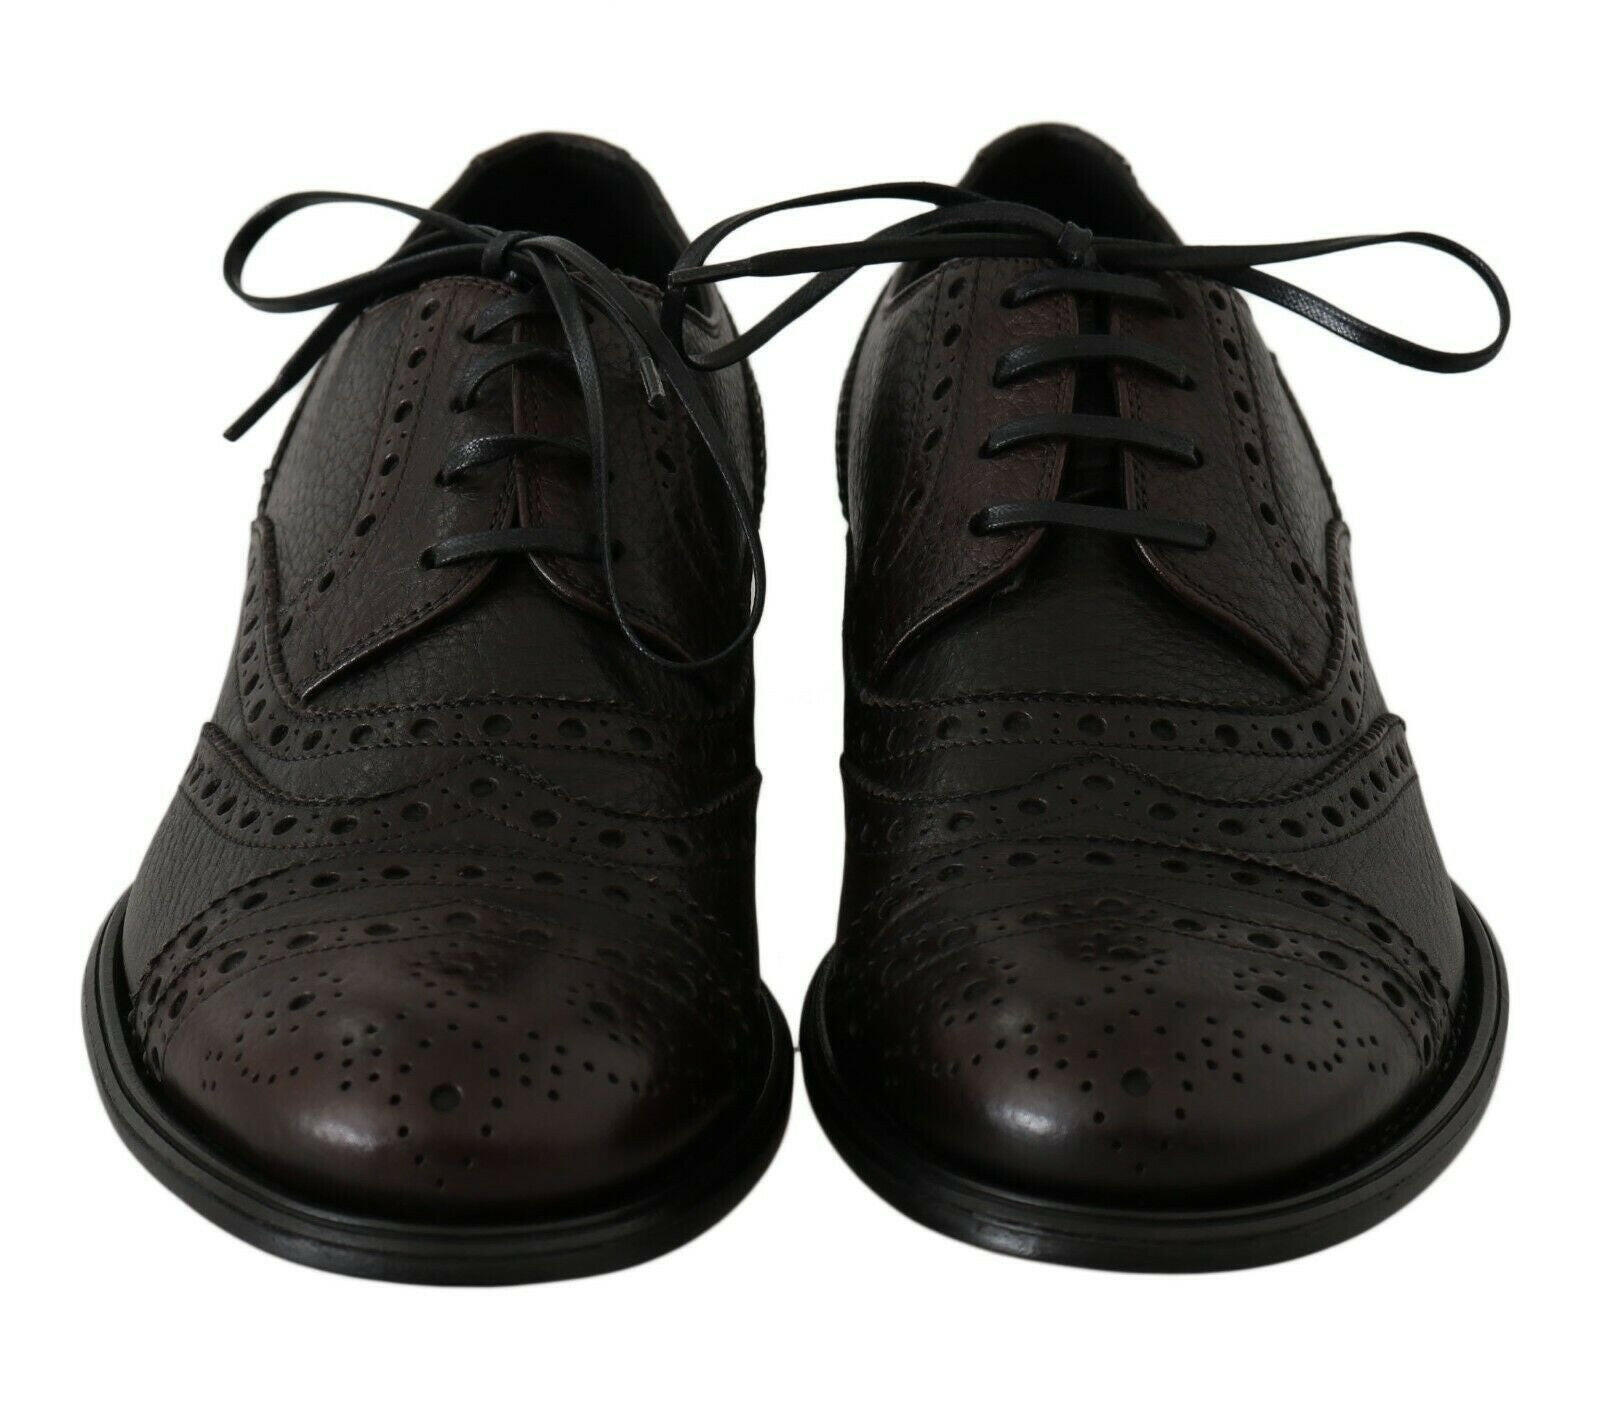 Dolce & Gabbana Brown Leather Wingtip Derby Formal Shoes - GENUINE AUTHENTIC BRAND LLC  